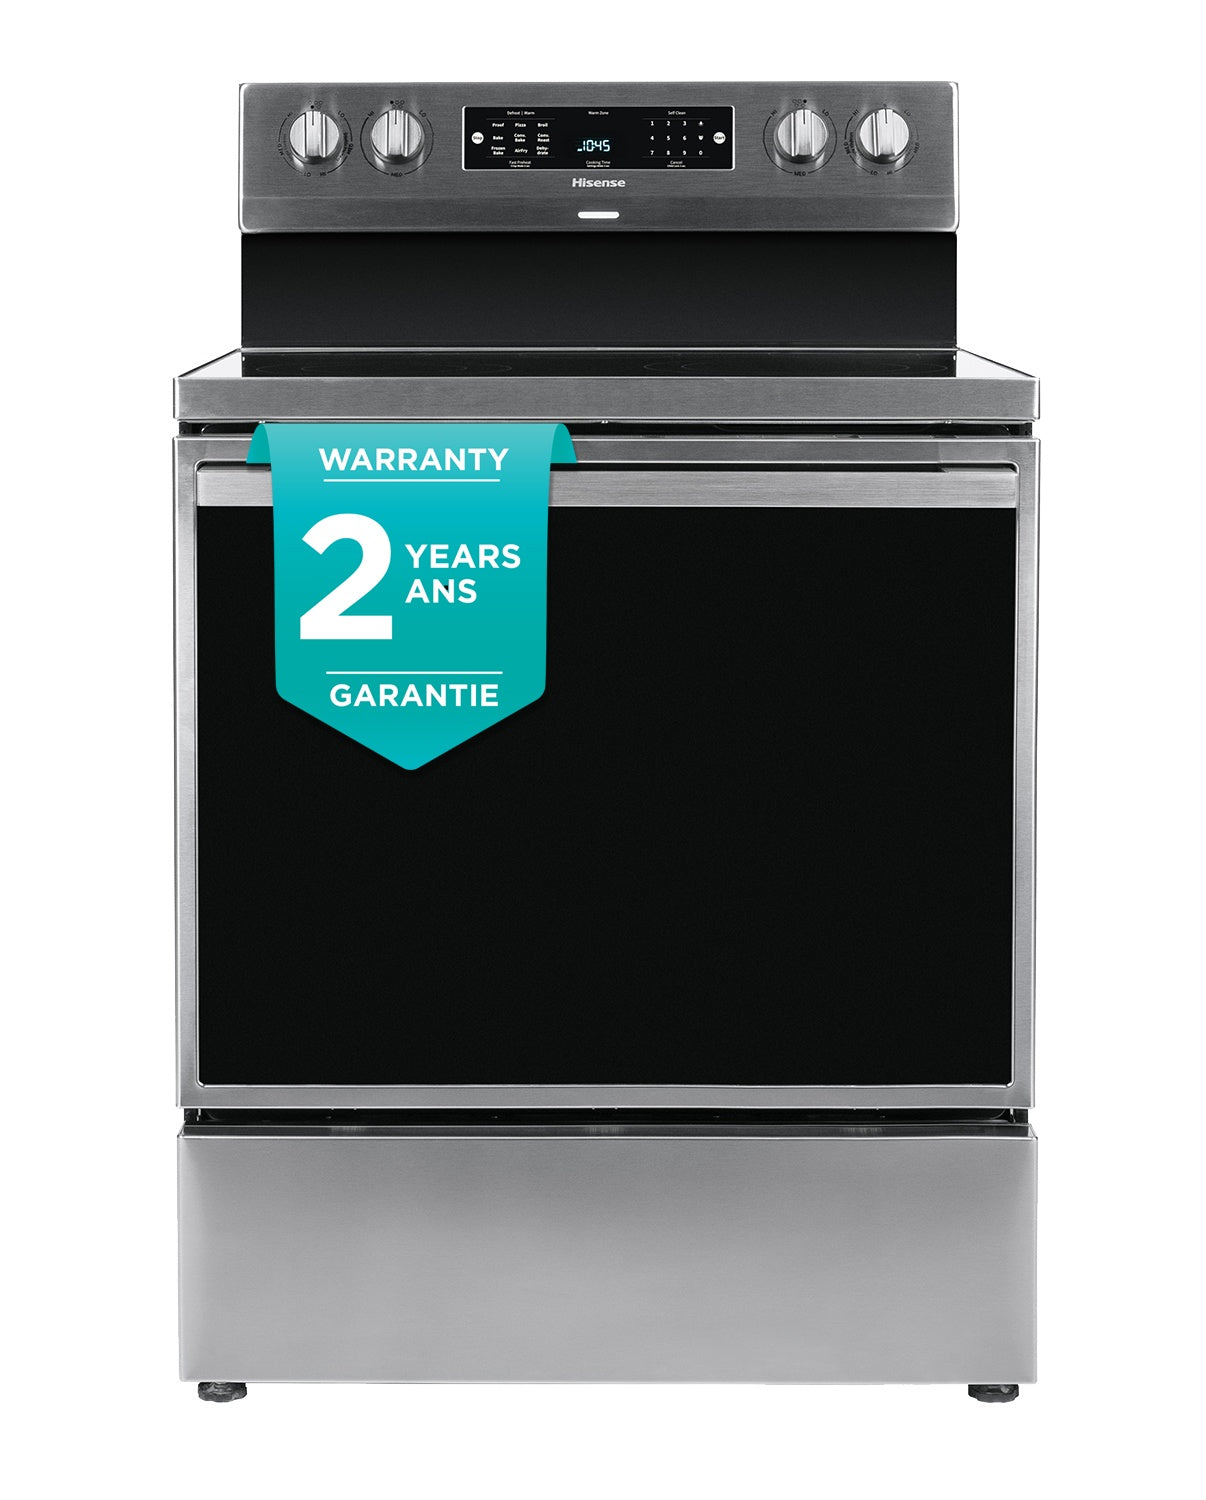 Hisense Stainless Steel Range True Convection with 11 Baking Programs Including Air Fry (5.8 Cu. Ft) - HBE3501CPS